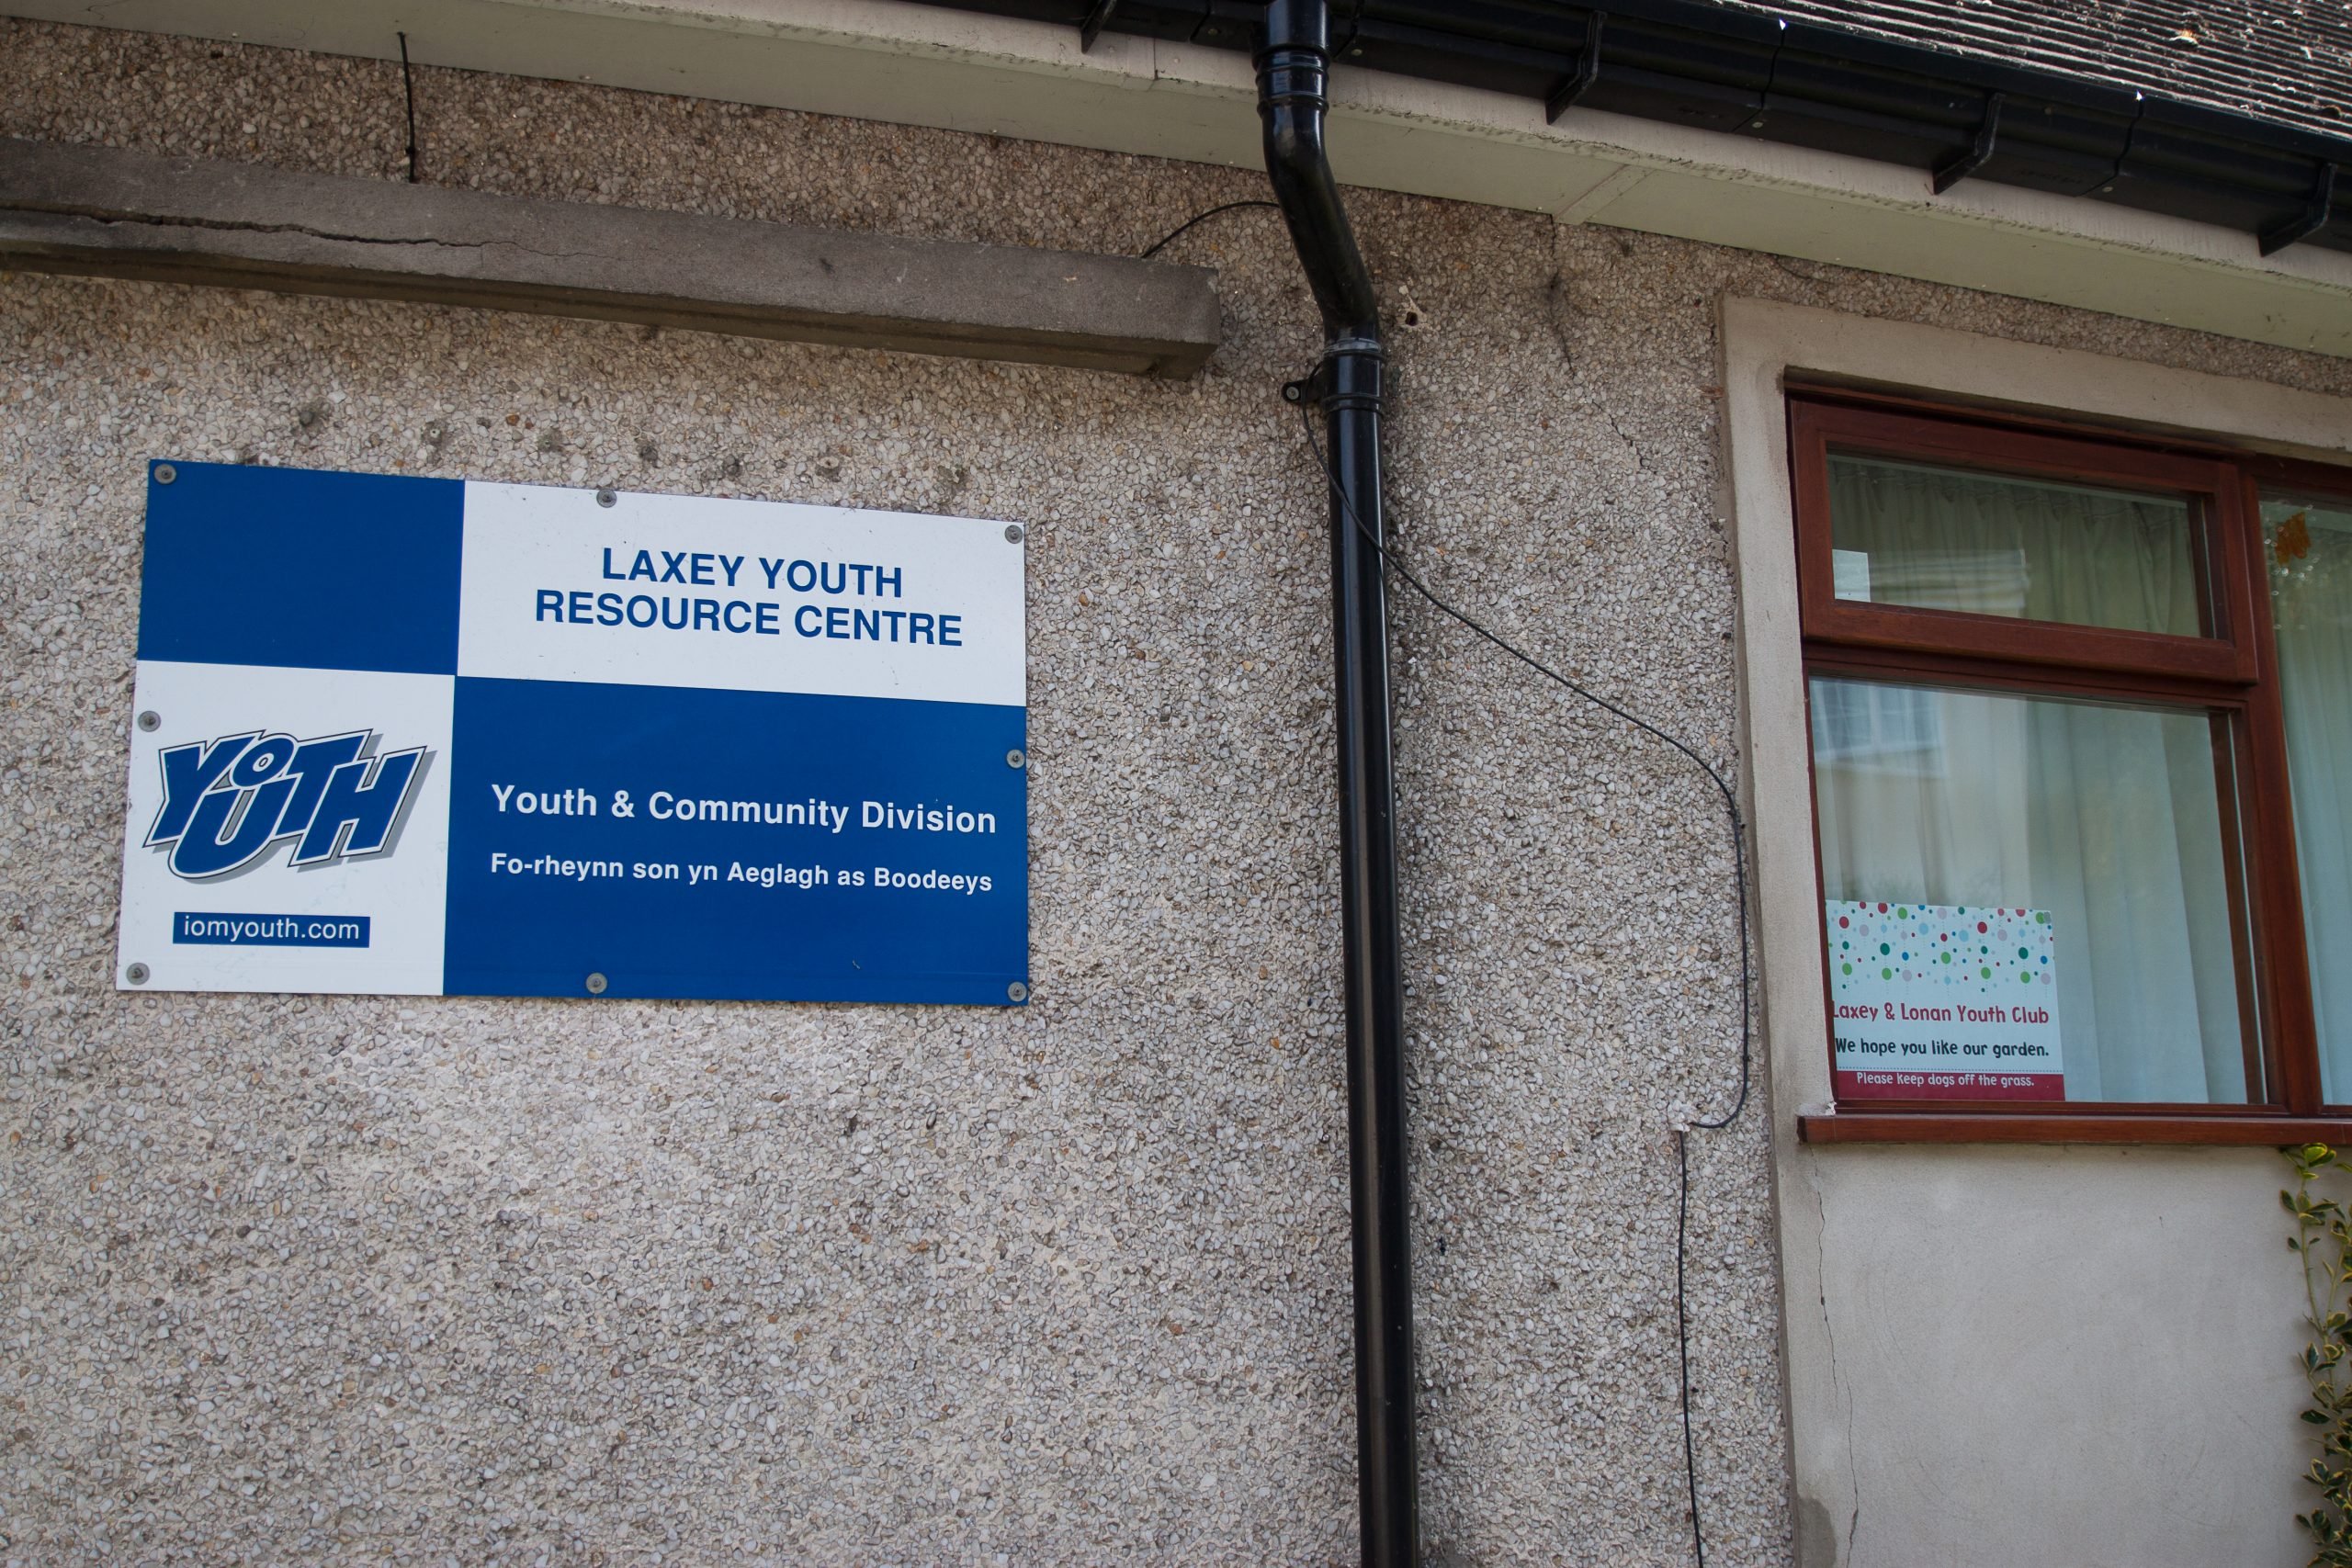 Laxey Youth Resource Centre 19 New Road, Laxey IM4 7BG